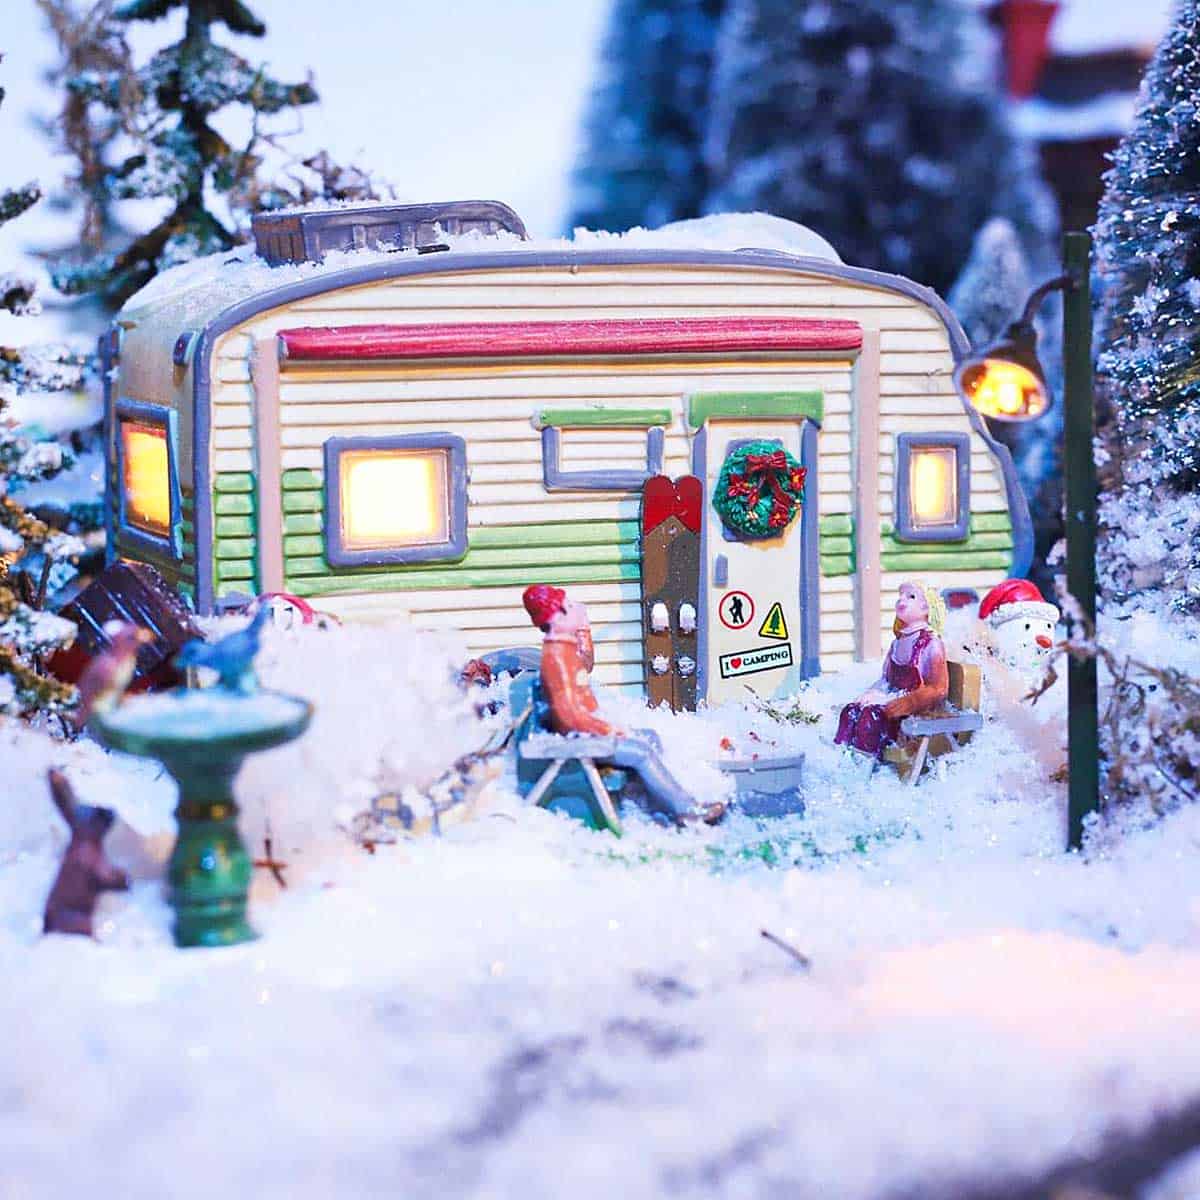 A Christmas toy trailer in a snow village.